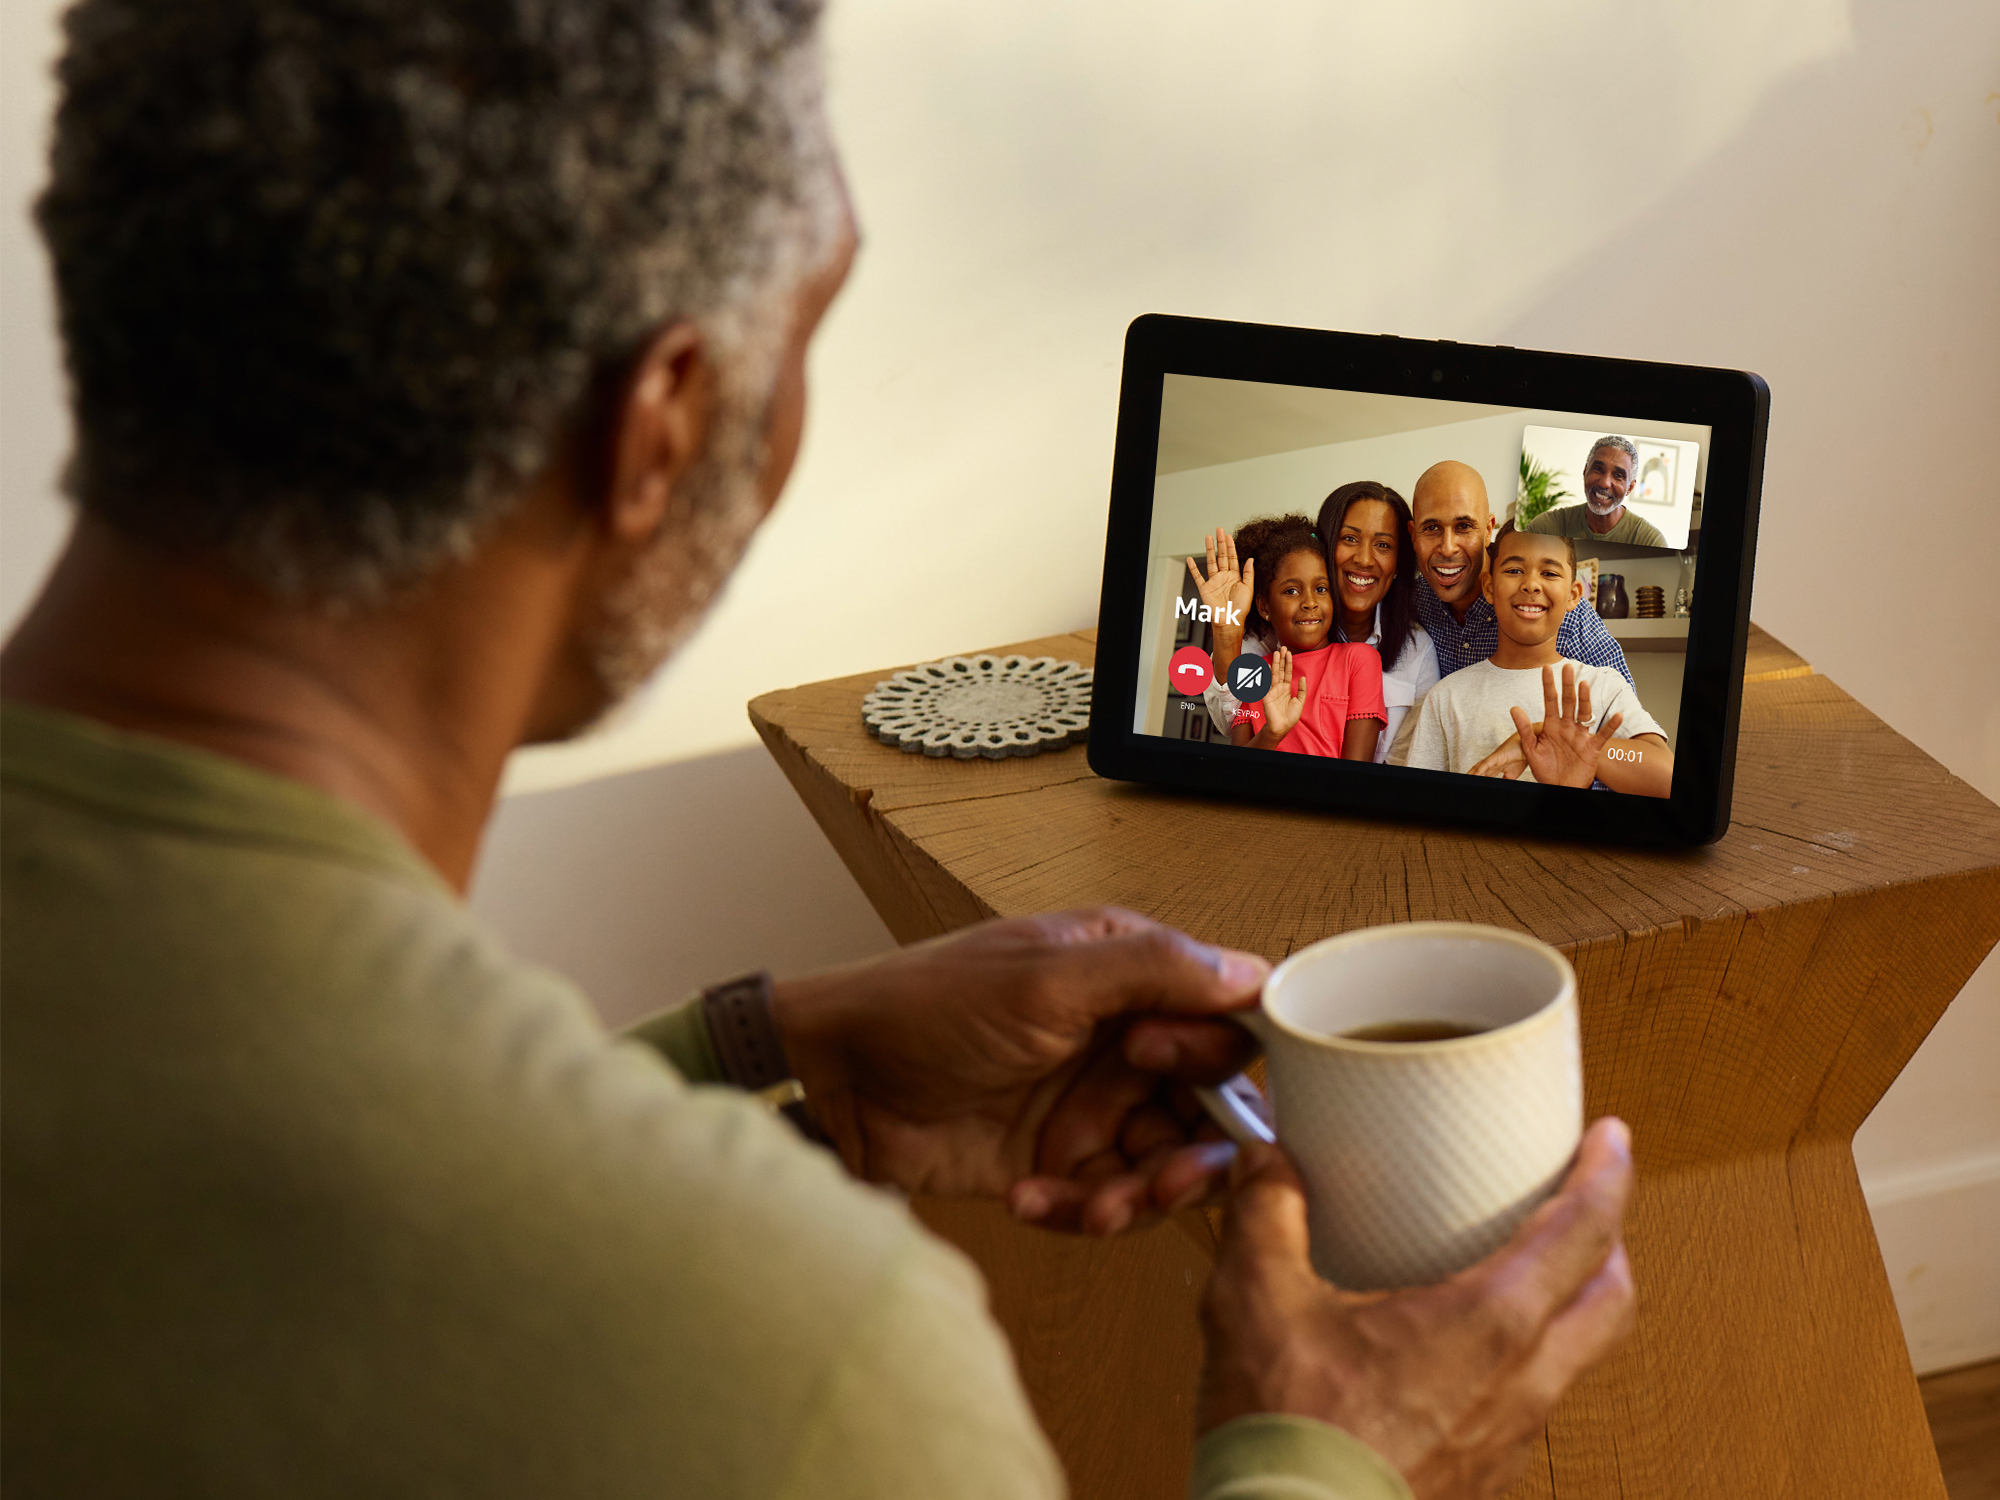 Man holding coffee mug sitting in front of Echo Show on a video call